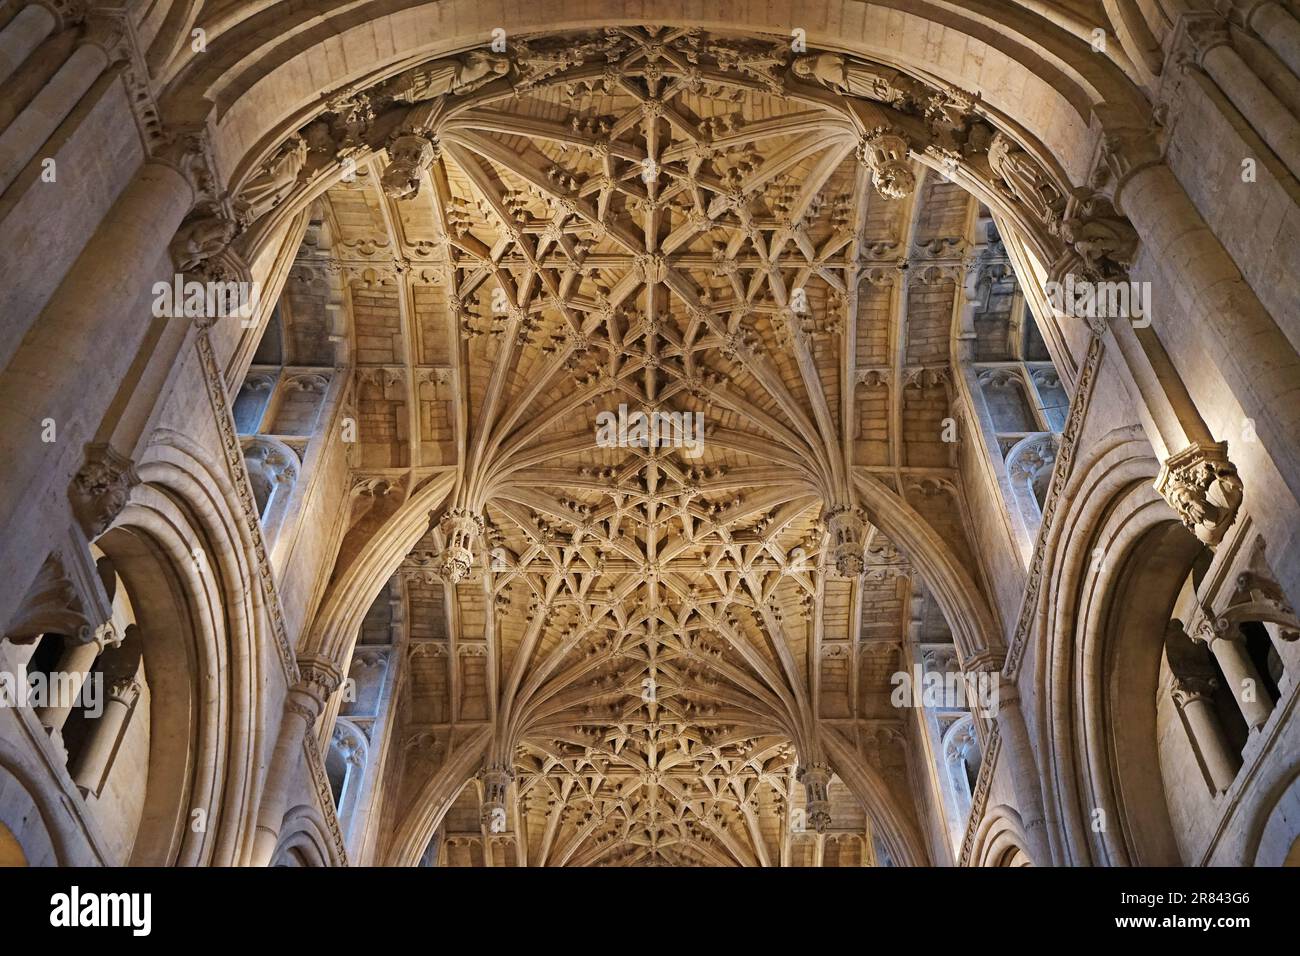 Interior European architecture and ceiling design decoration of Christ Church colleges of Oxford University and cathedral- United Kingdom Stock Photo